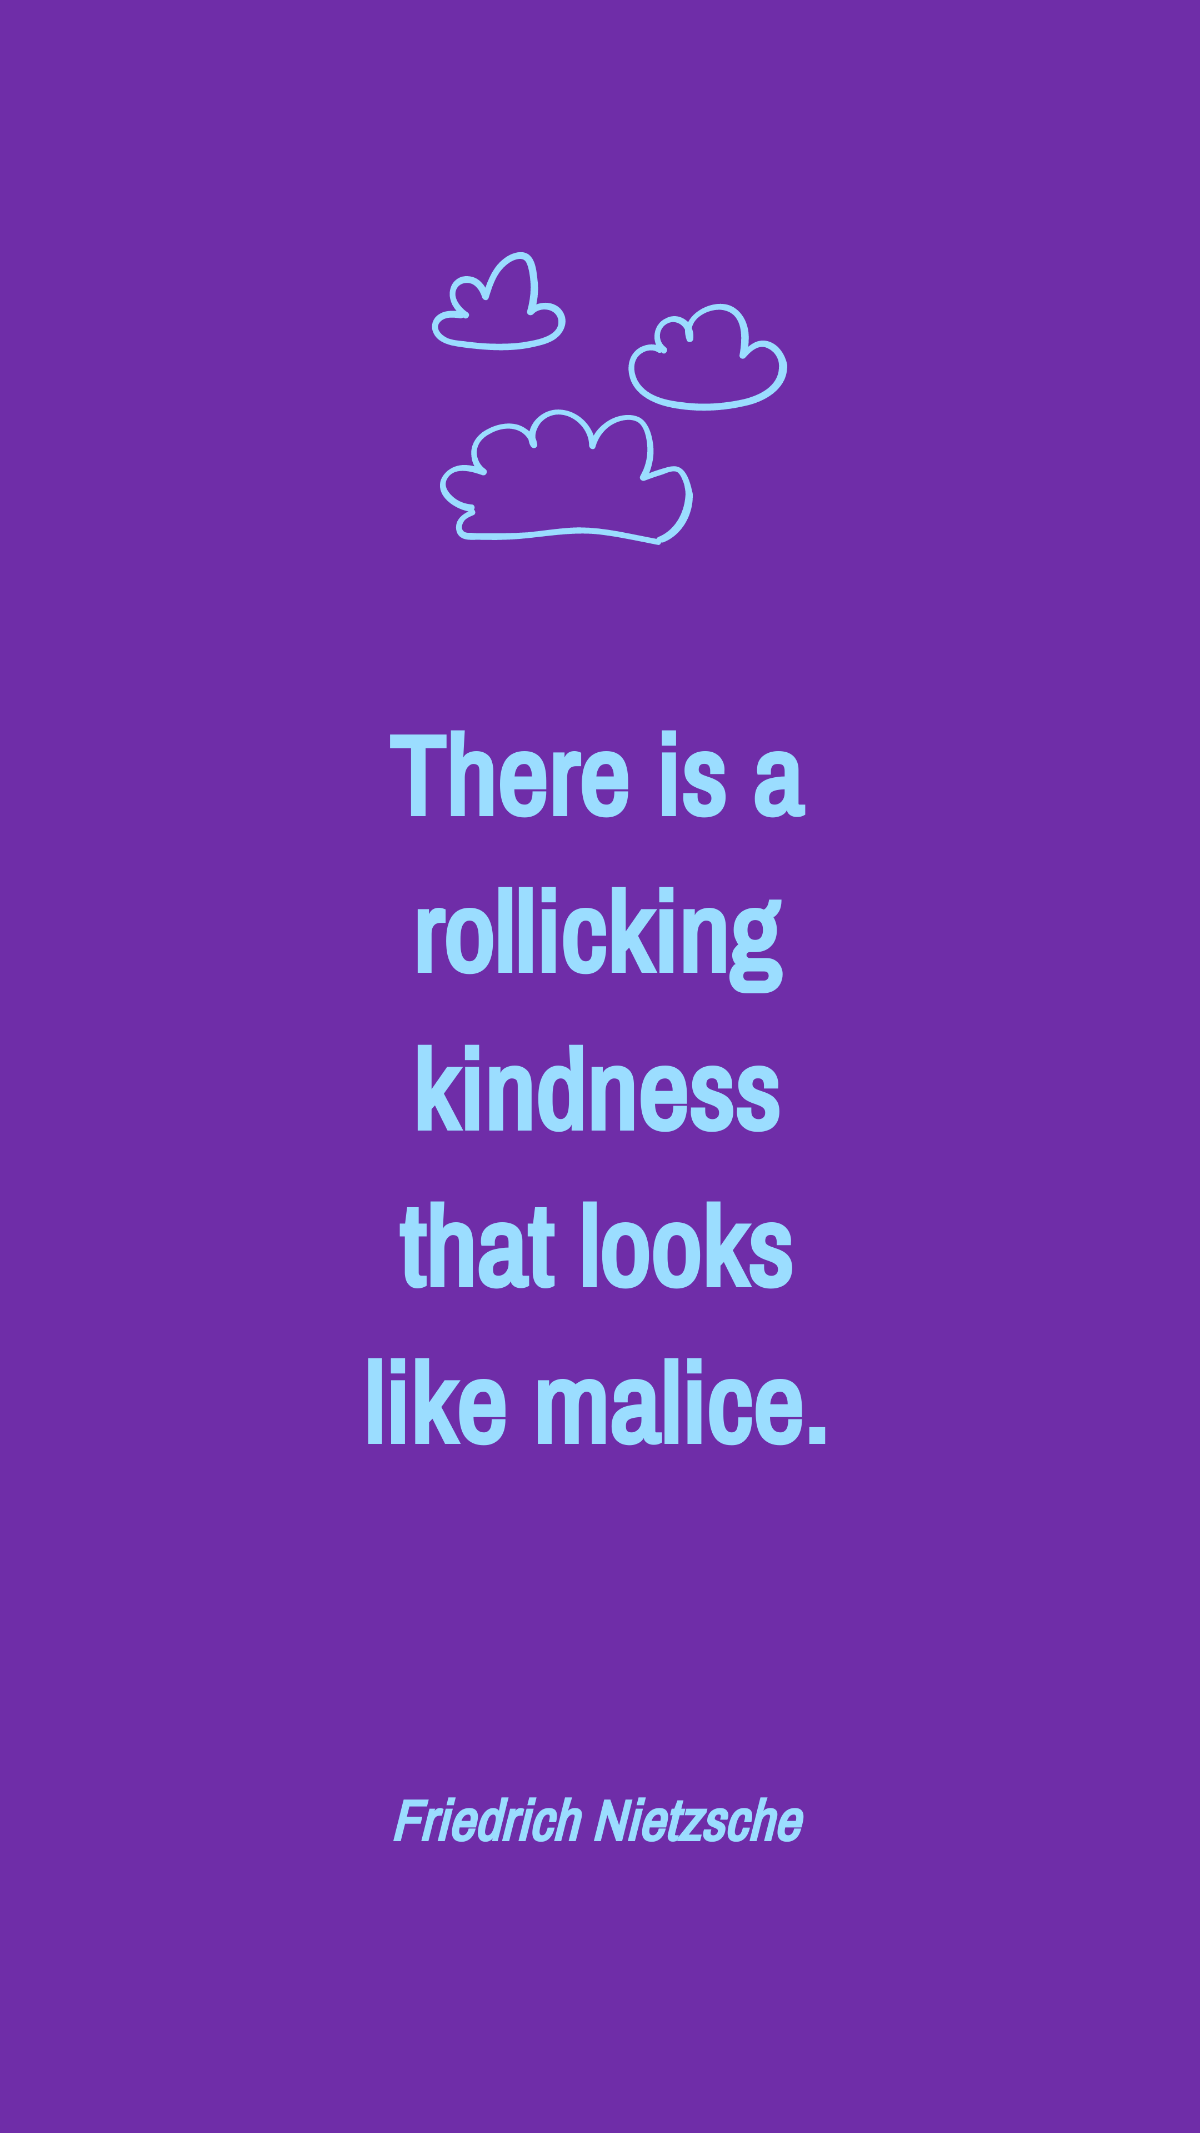 Free Friedrich Nietzsche - There is a rollicking kindness that looks like malice. Template